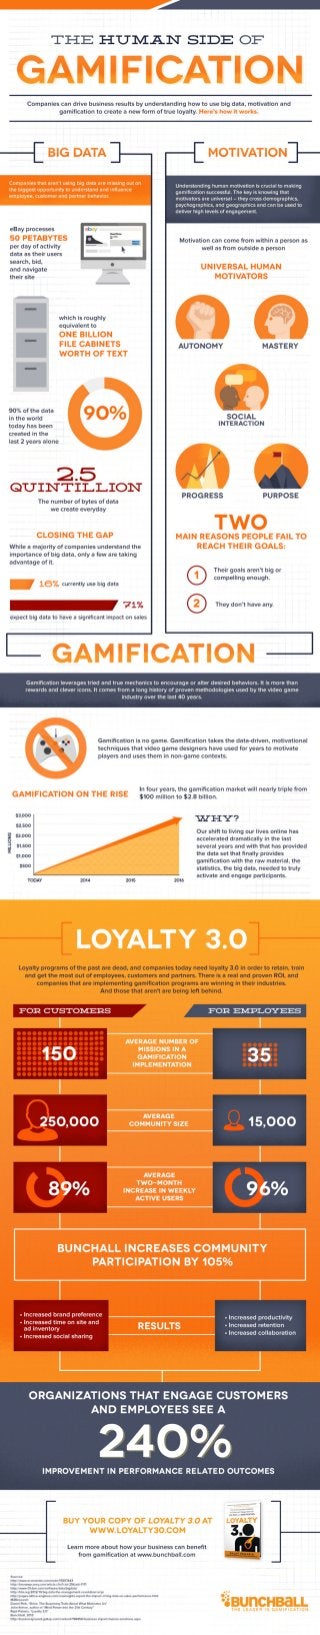 The Human Side of Gamification - Customers can drive business results by understanding big data, motivation, and gamification to create a new form of true loyalty